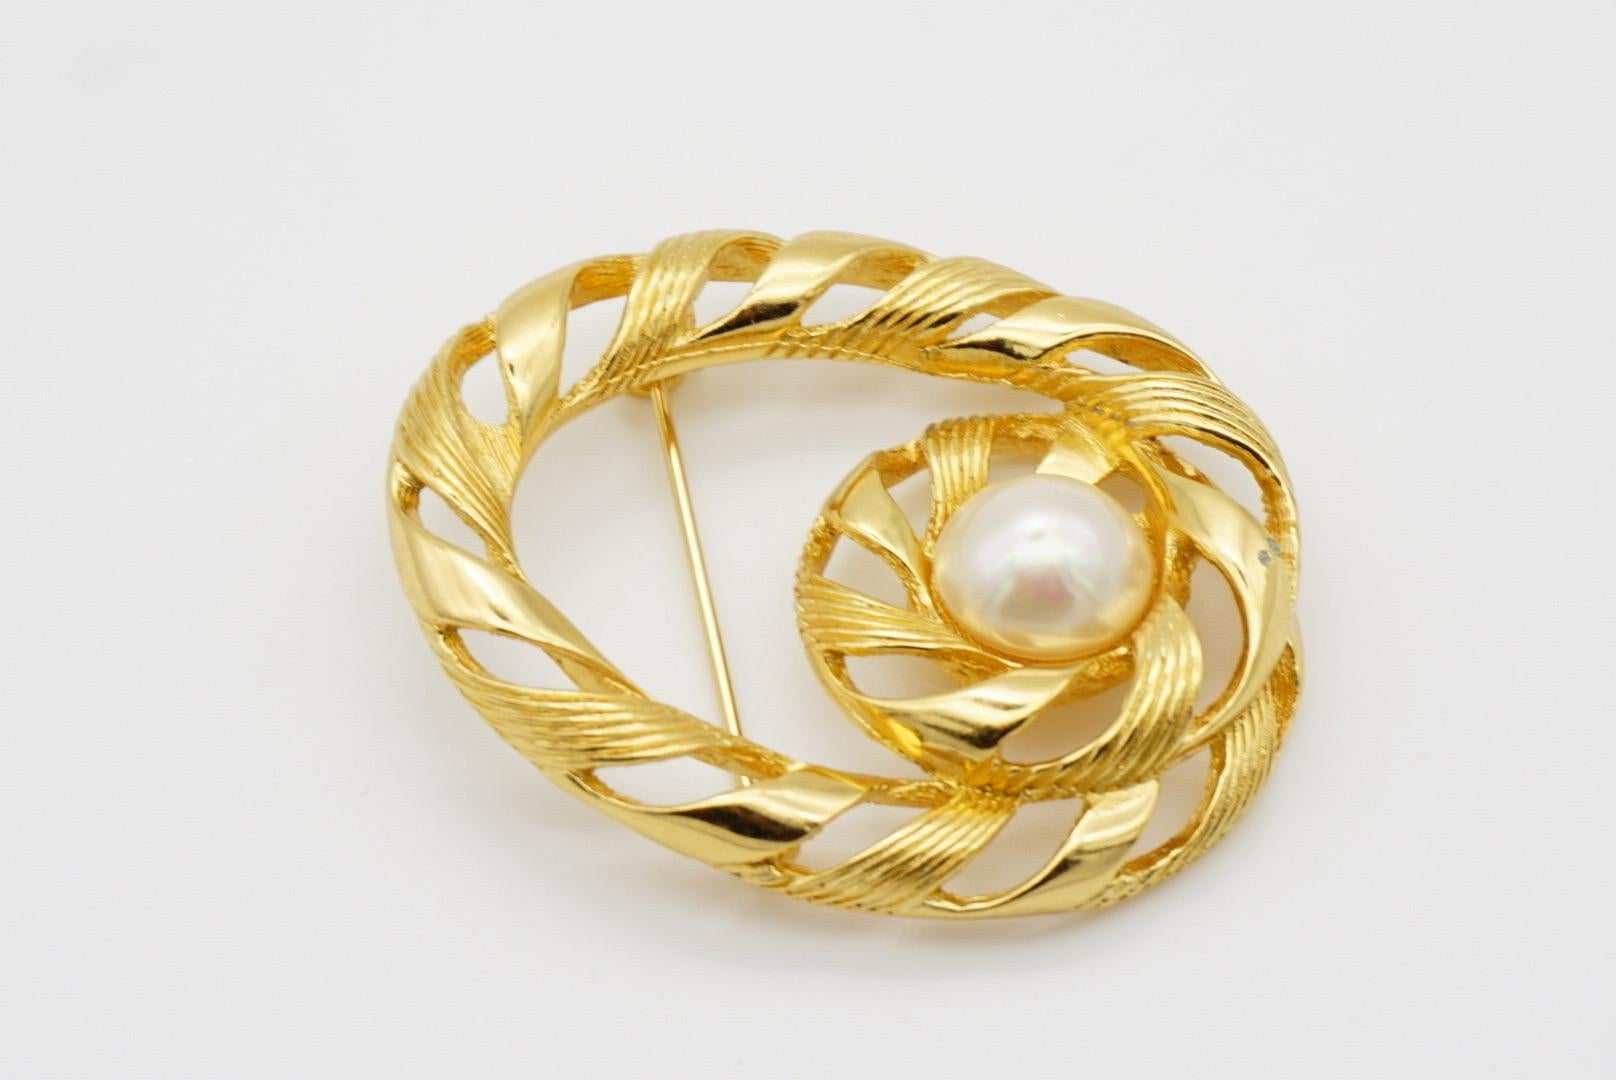 Christian Dior 1970s Vintage Large Openwork Round Swirl Knot White Pearl Brooch For Sale 10